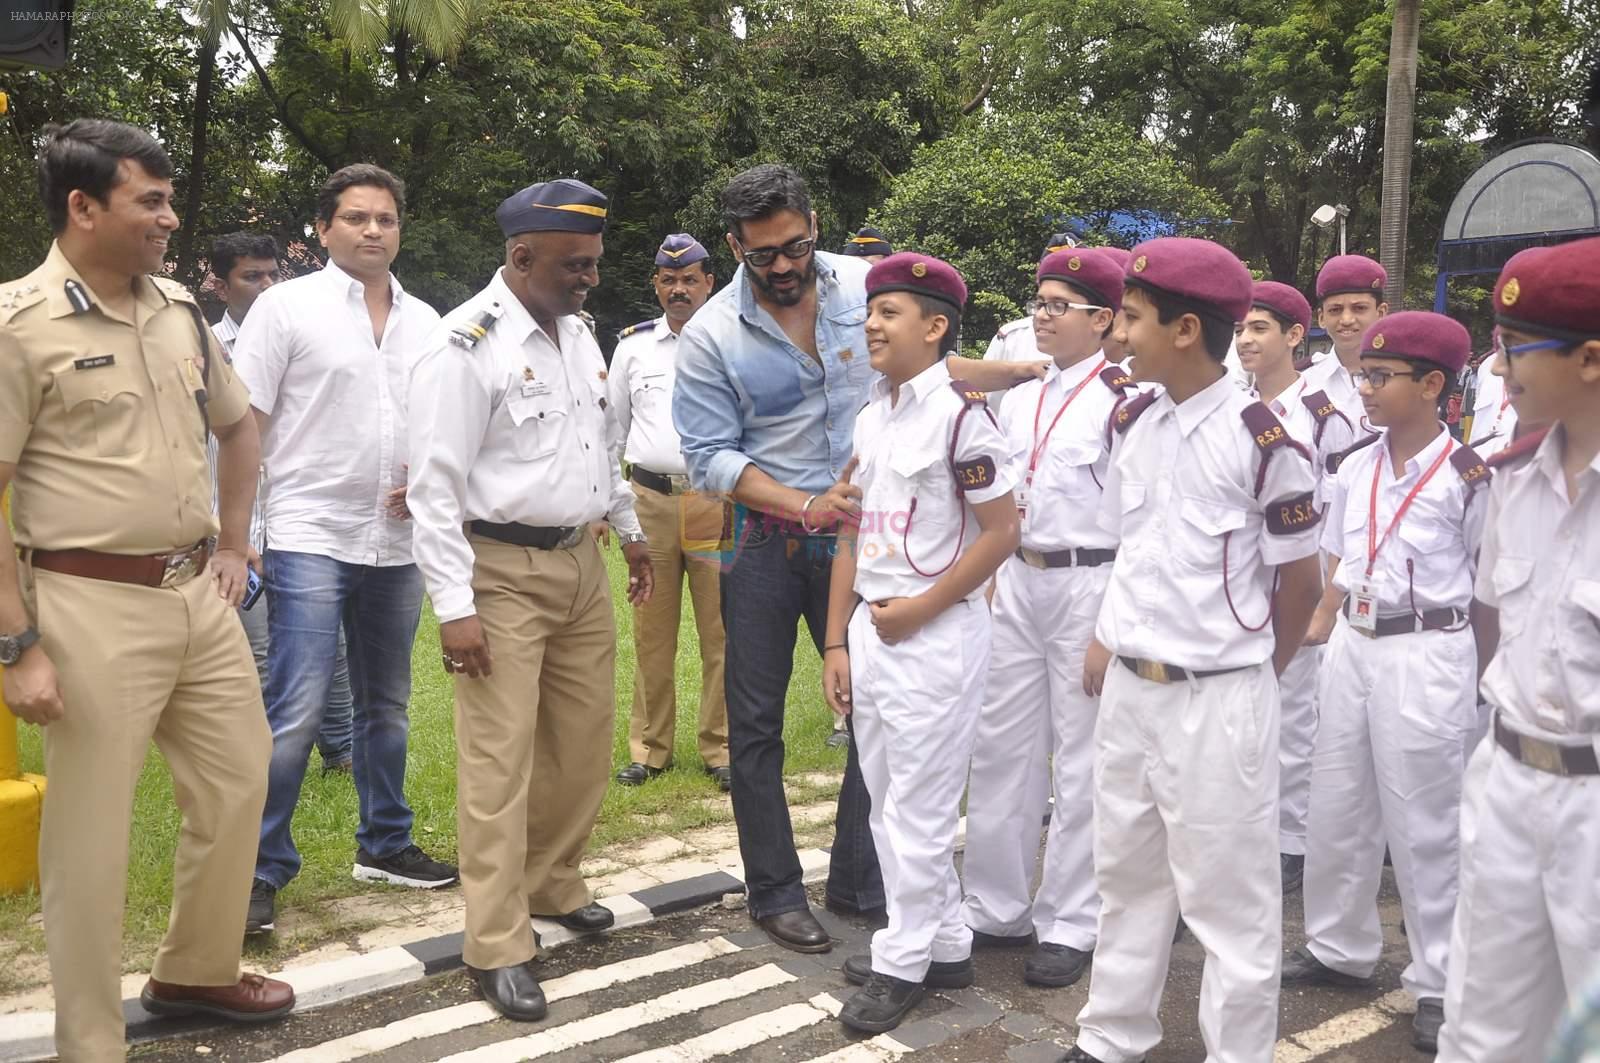 Sunil Shetty at traffic awareness in Colaba on 25th July 2015